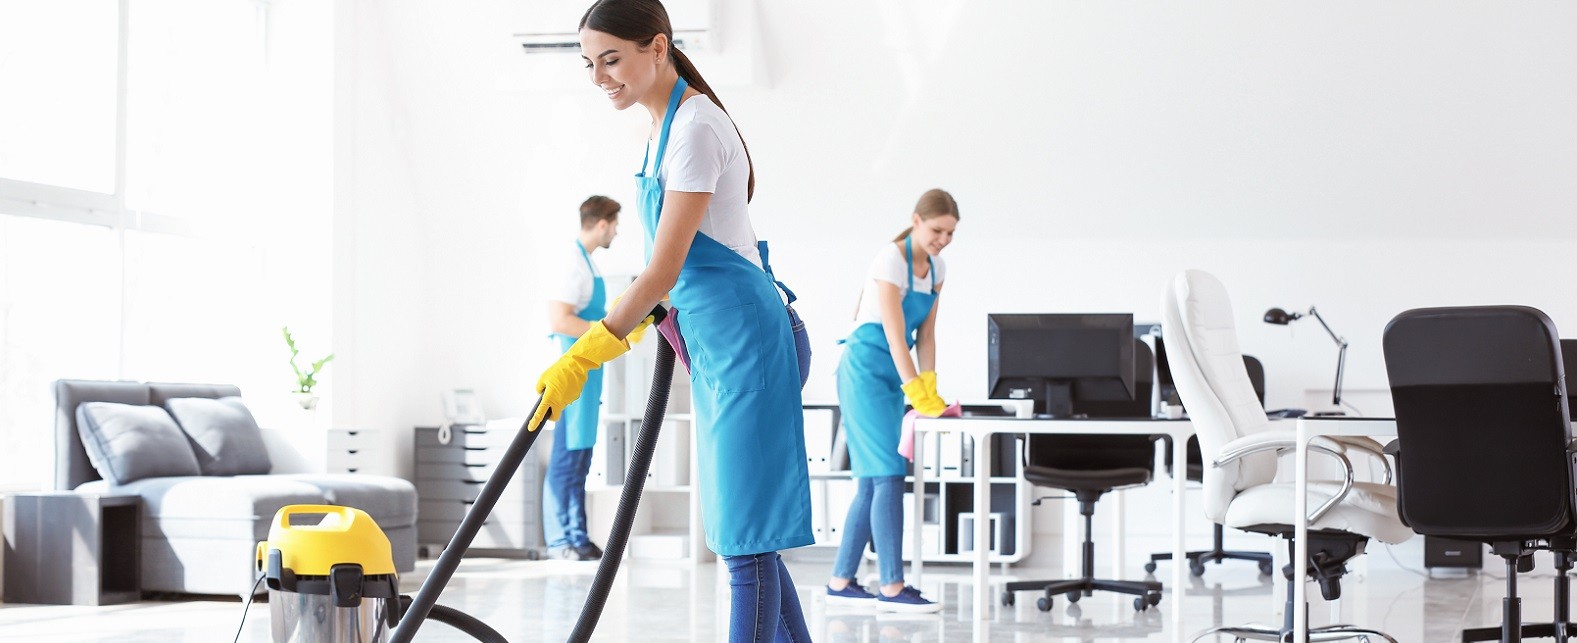 Find Your Niche When Buying a Cleaning Business in Florida